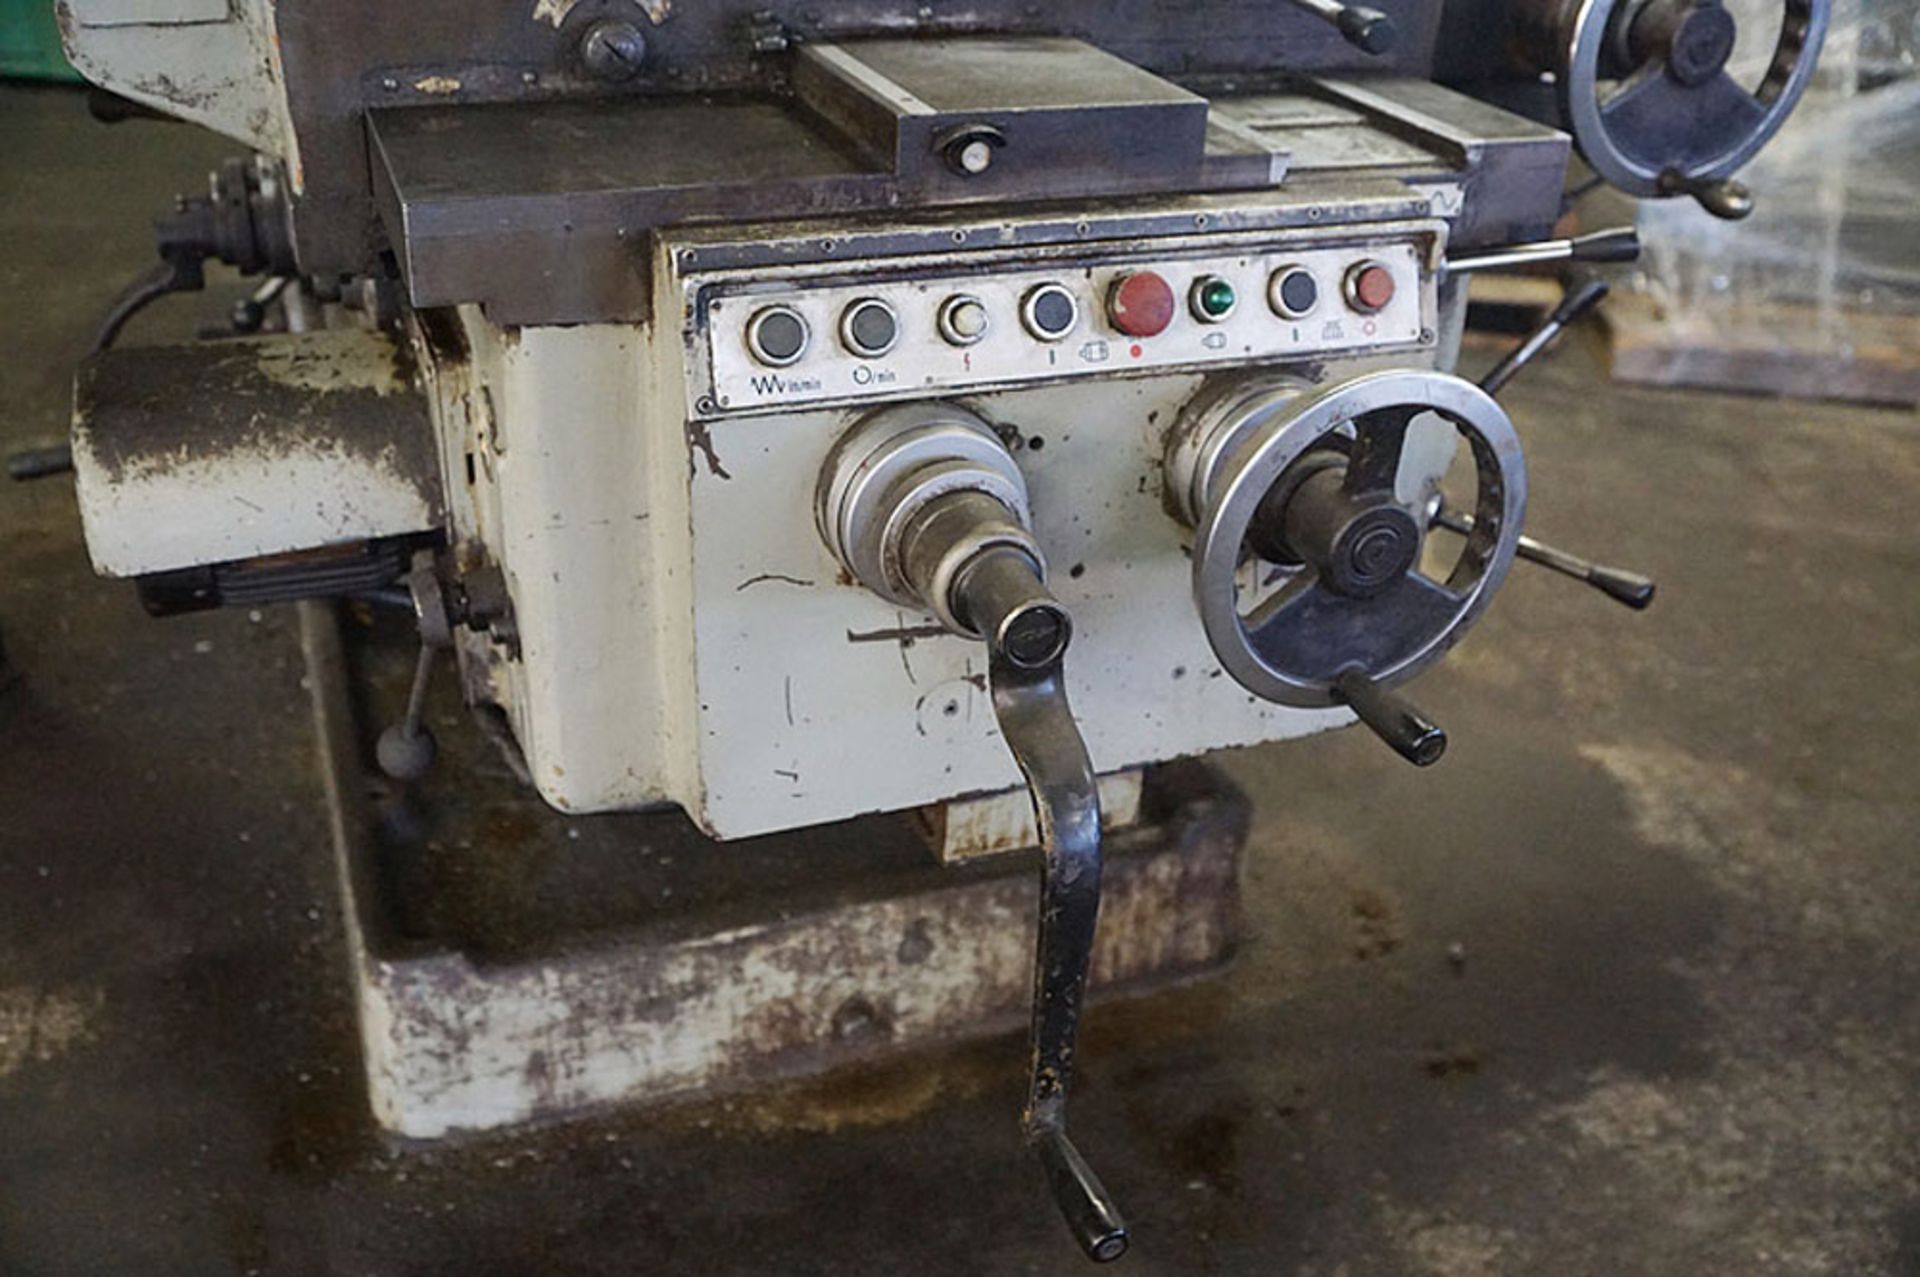 Okk - Horizontal Milling Machine | 18" x 96", Located In Painesville, OH - 7056P - Image 13 of 15